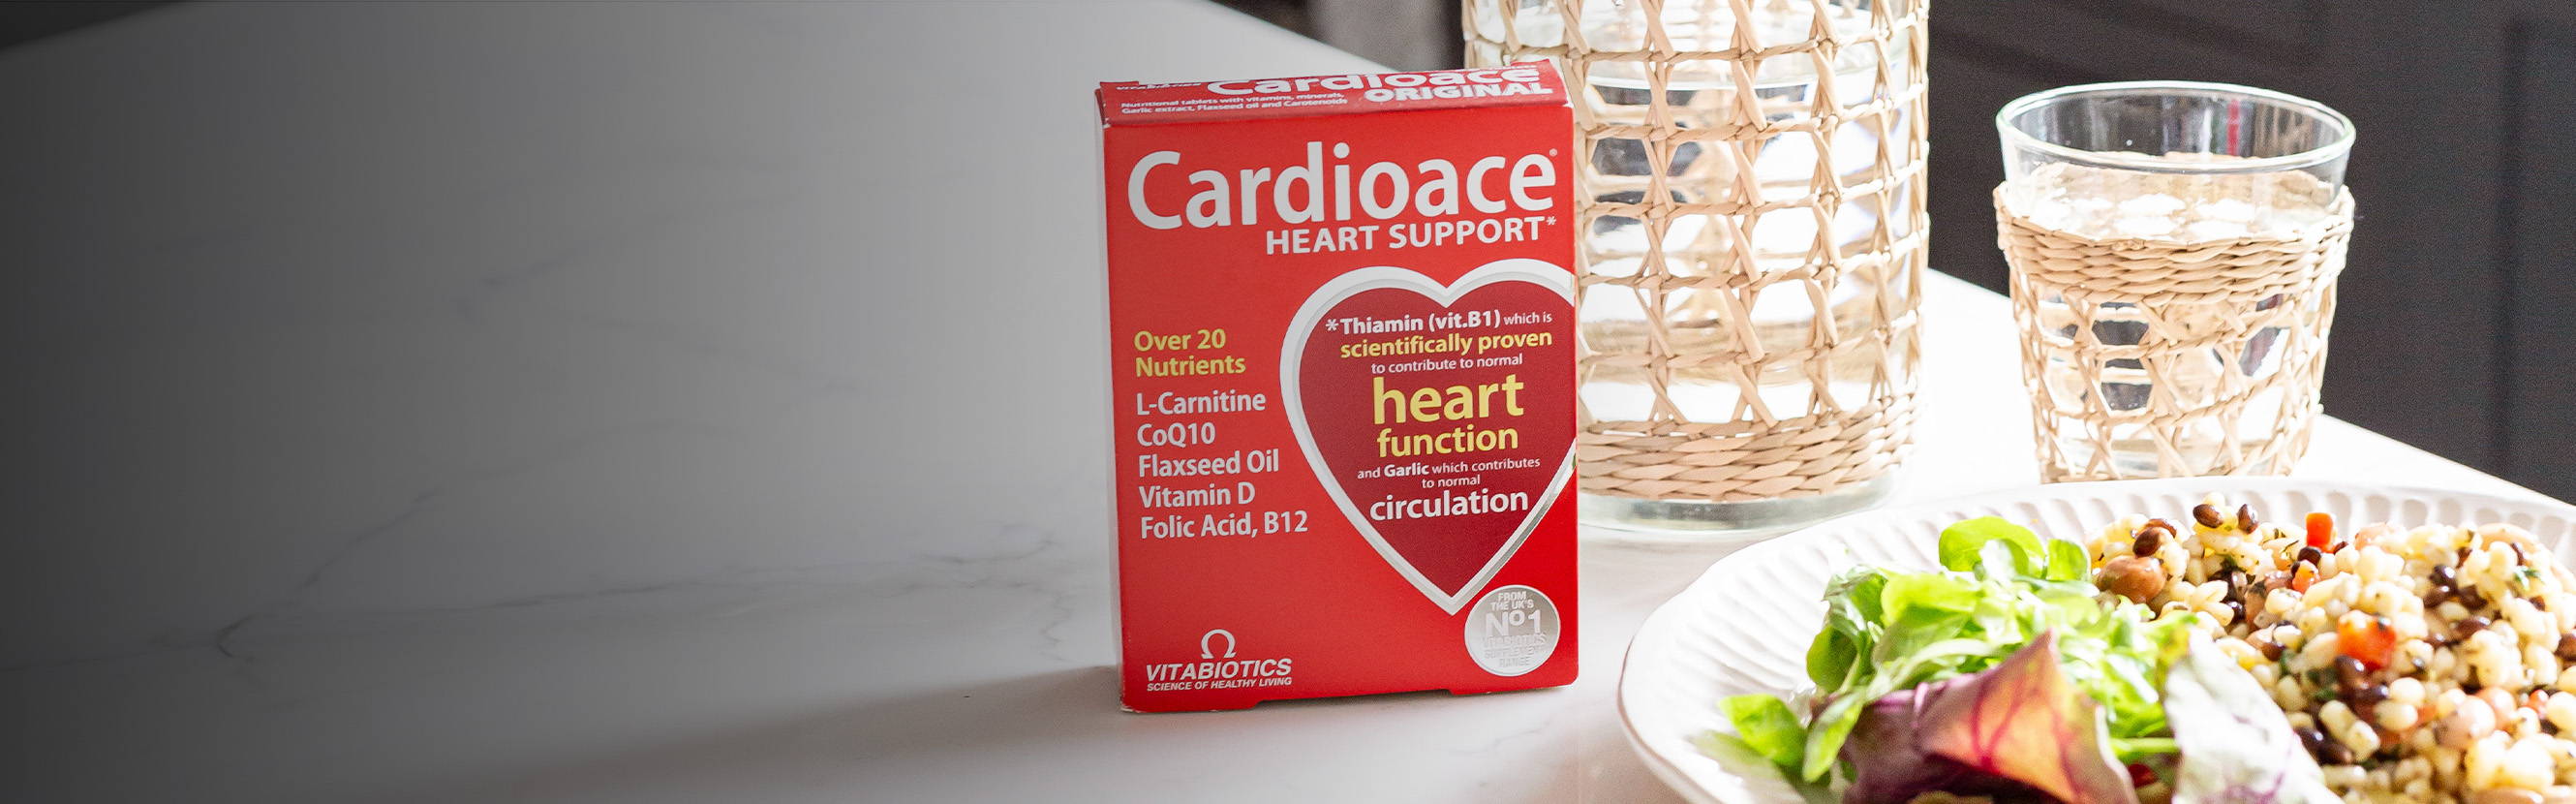  Research in cardiovascular science meets nature’s most trusted botanicals. Cardioace contains specific nutrients that support cardiovascular health as well as Garlic extract which contributes to normal heart health and Flaxseed Oil, a source of Omega-3 and Omega-6 fatty acids. 